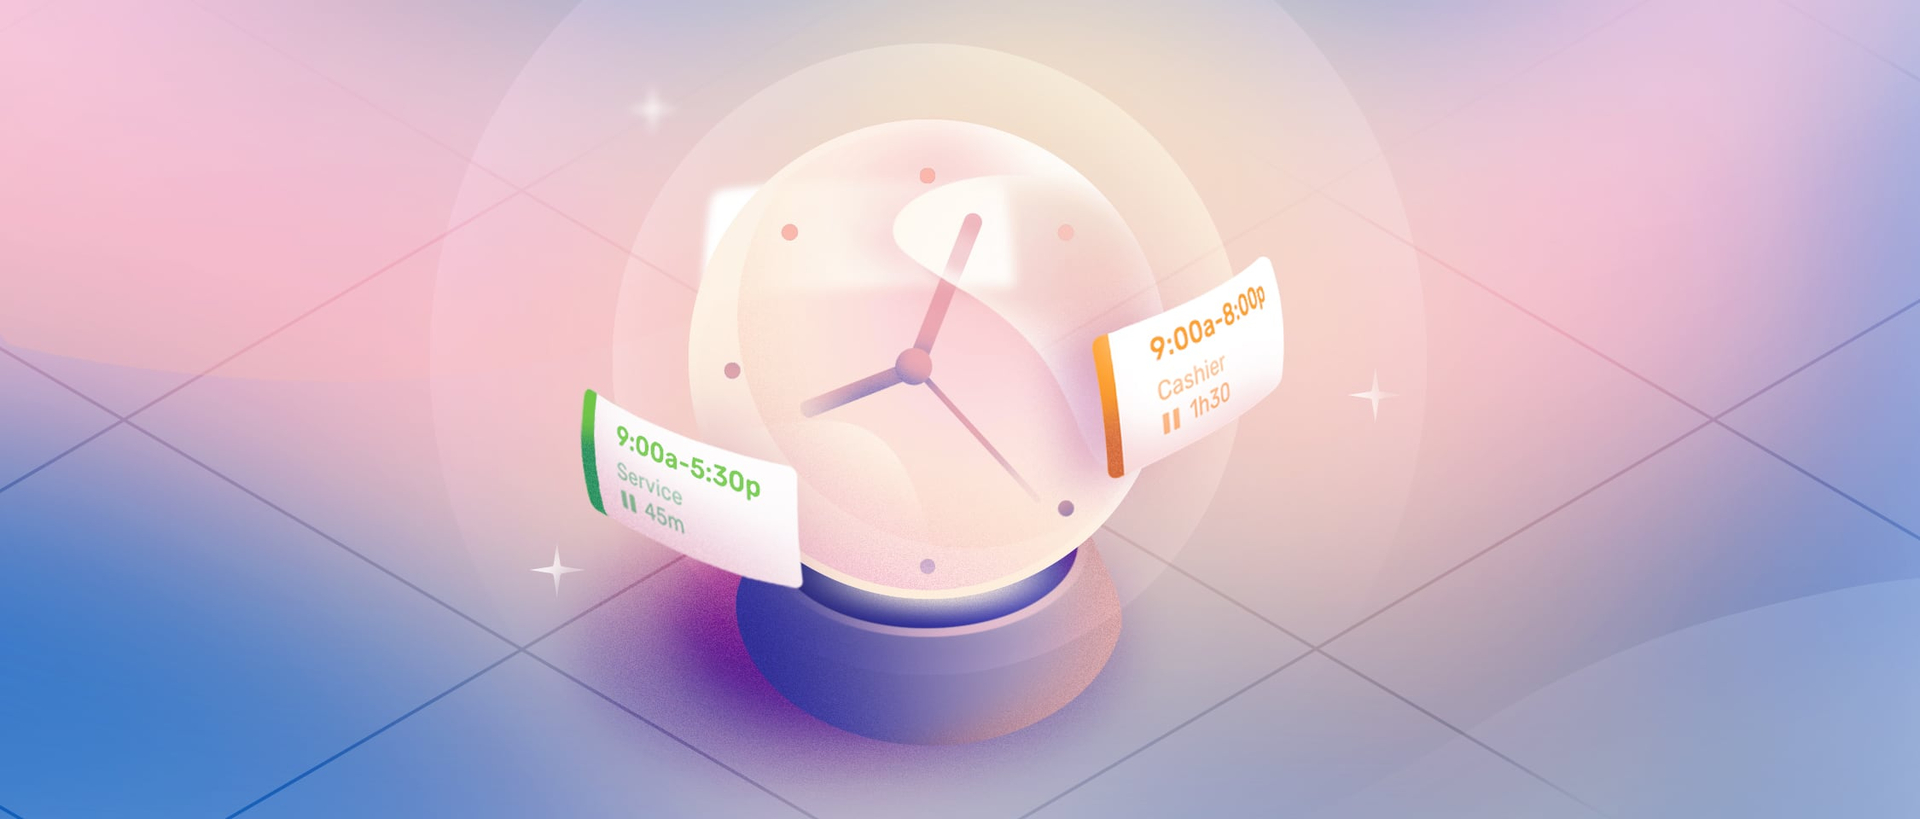 Crystal ball with clock and floating work shifts around it